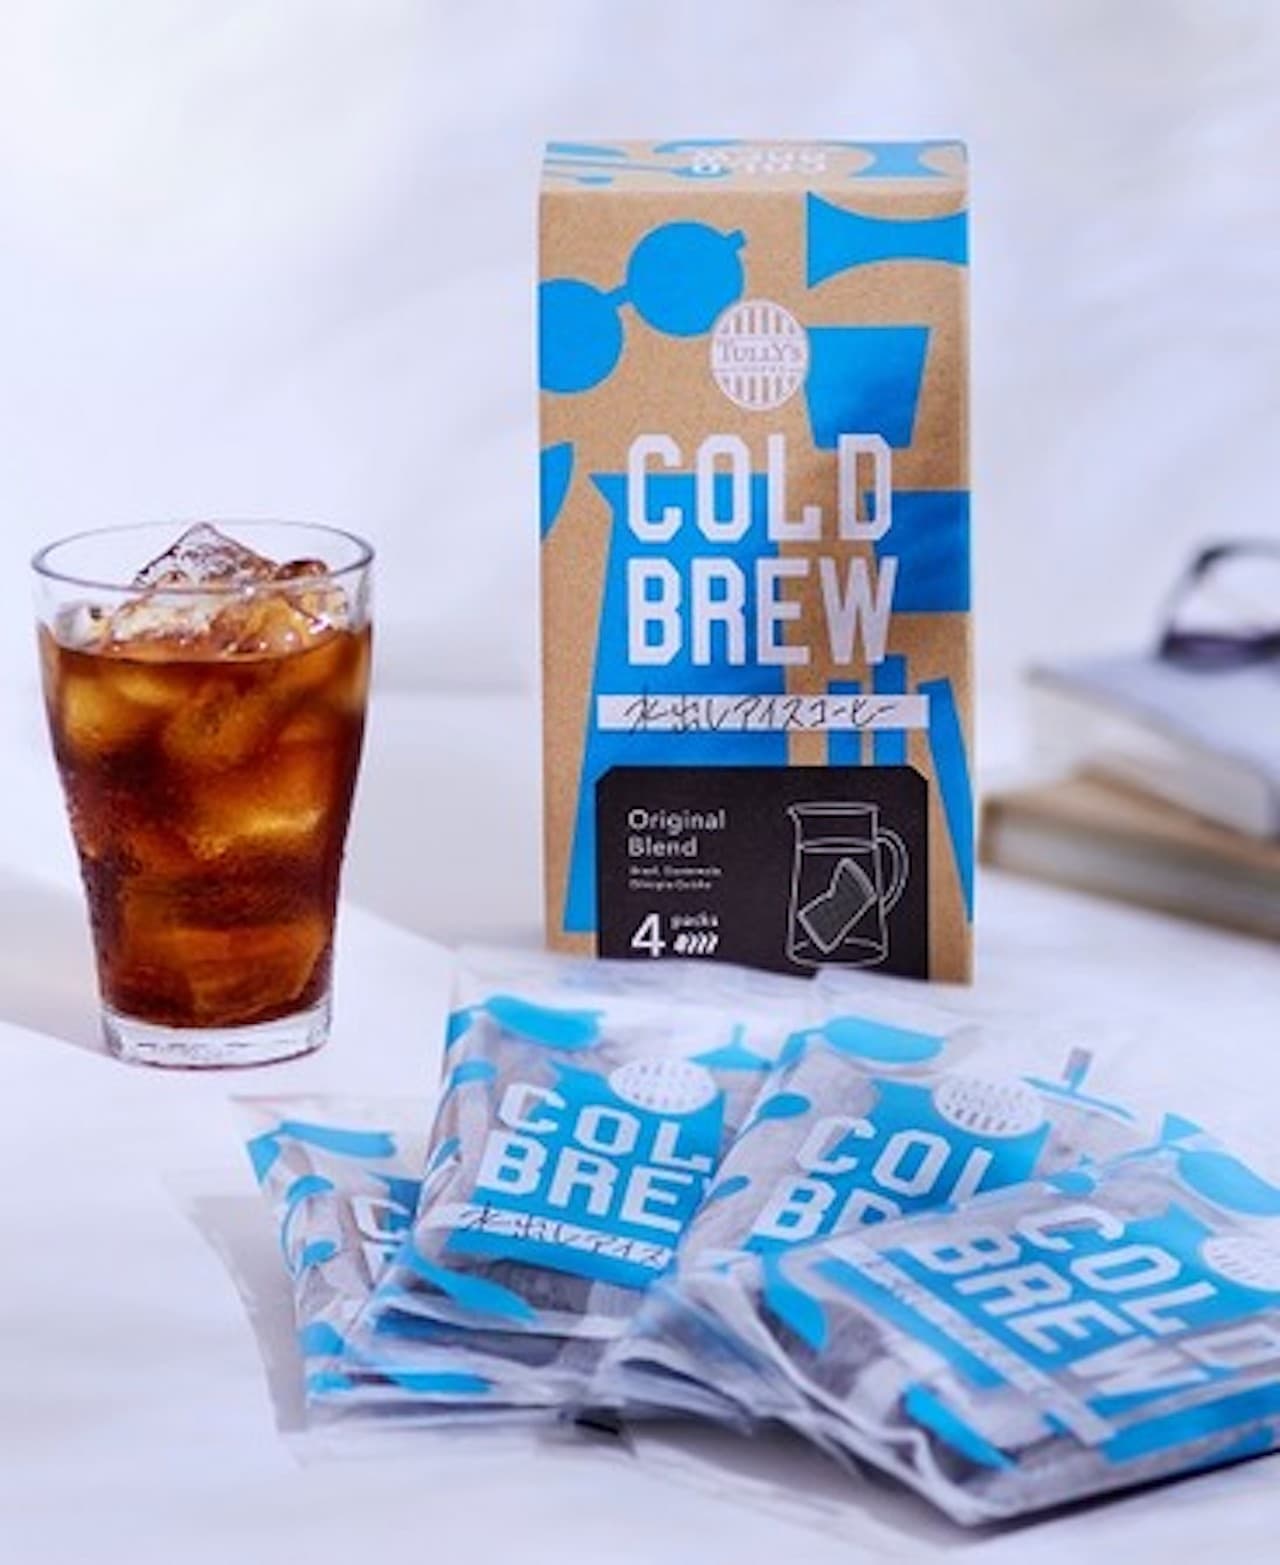 Limited time offer "Tully's Zips Cold Brew Coffee Original Blend"